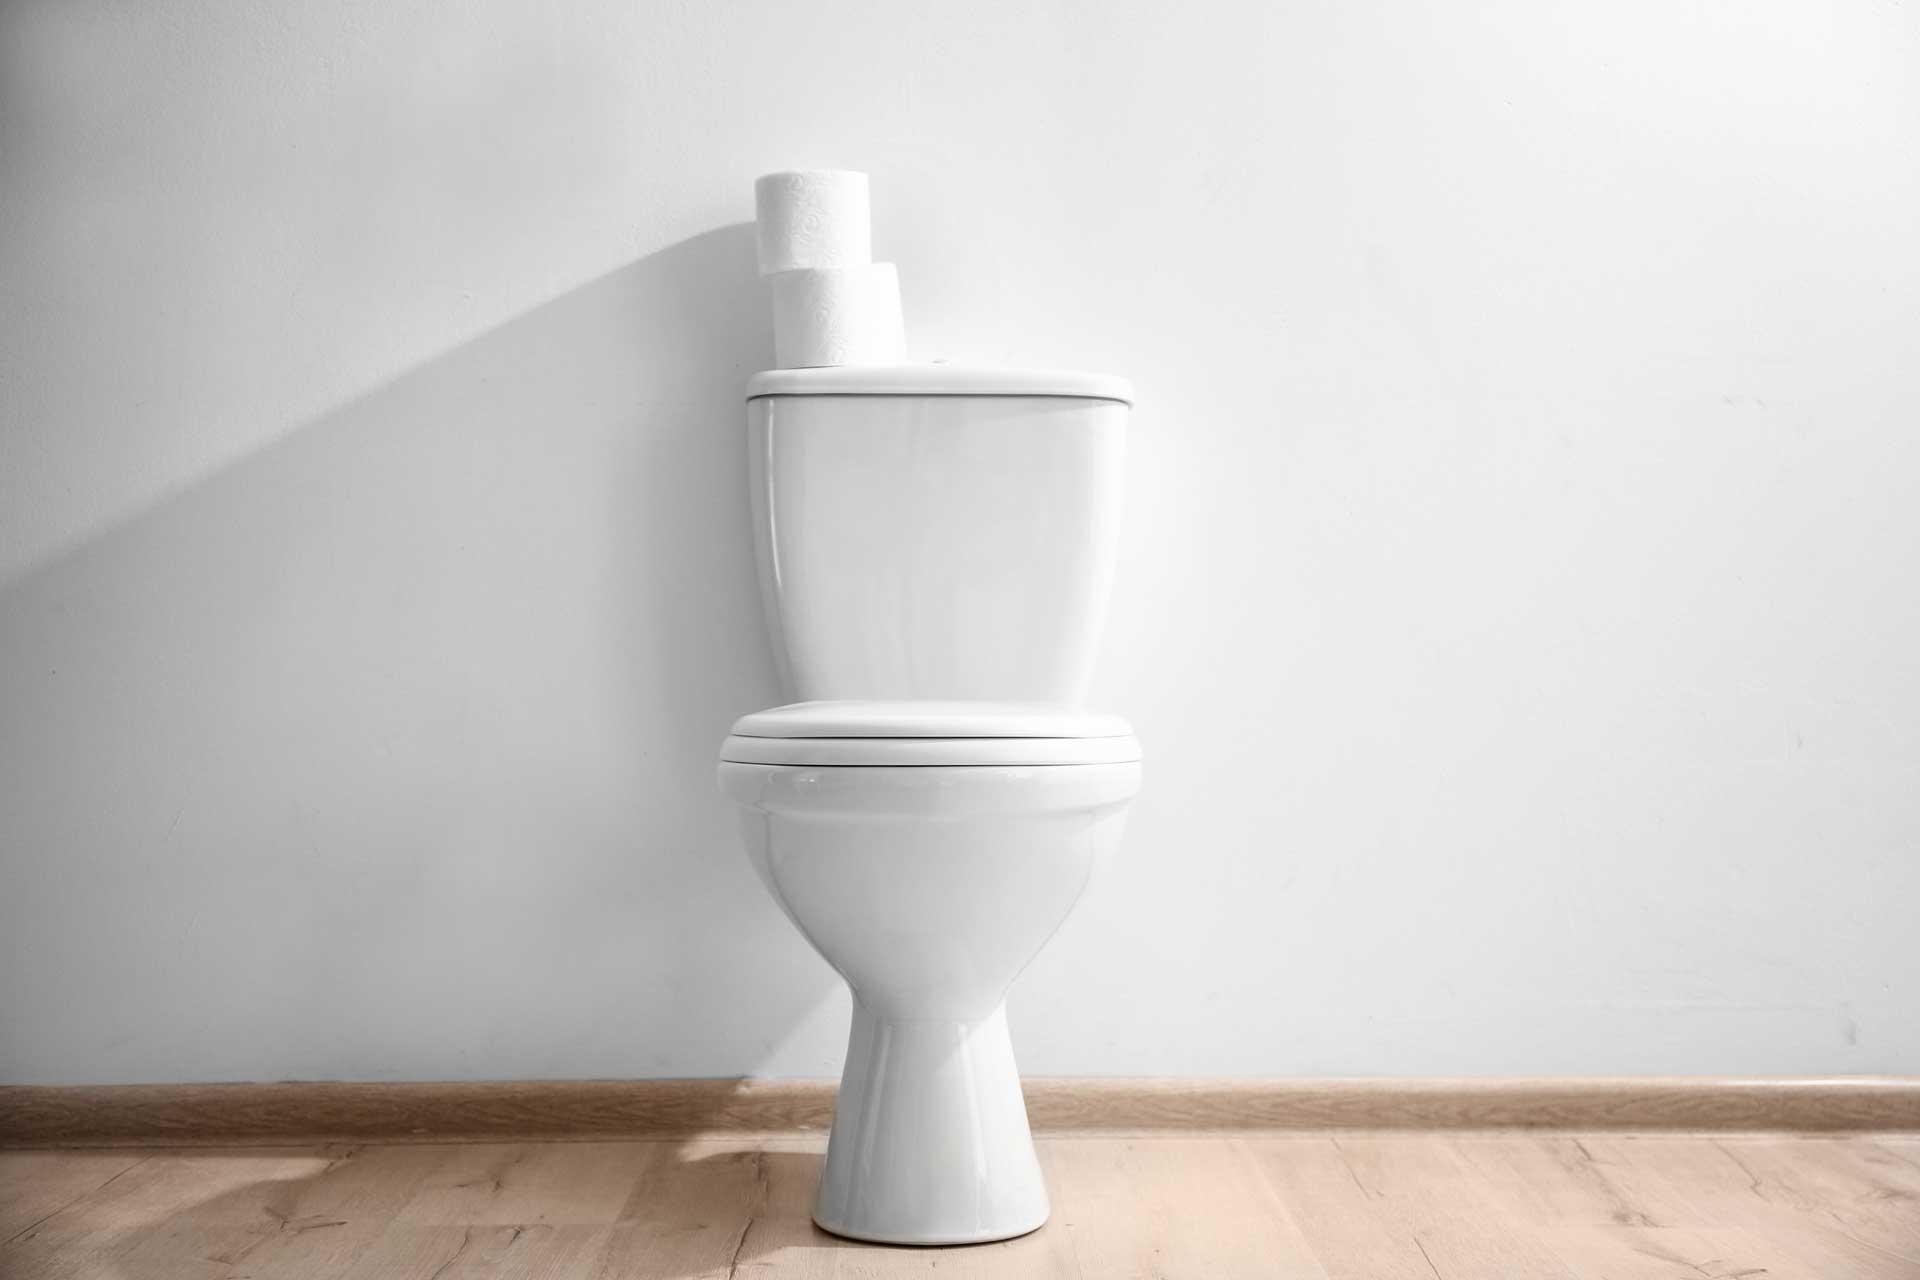 6 Reasons Your Toilet Keeps Clogging